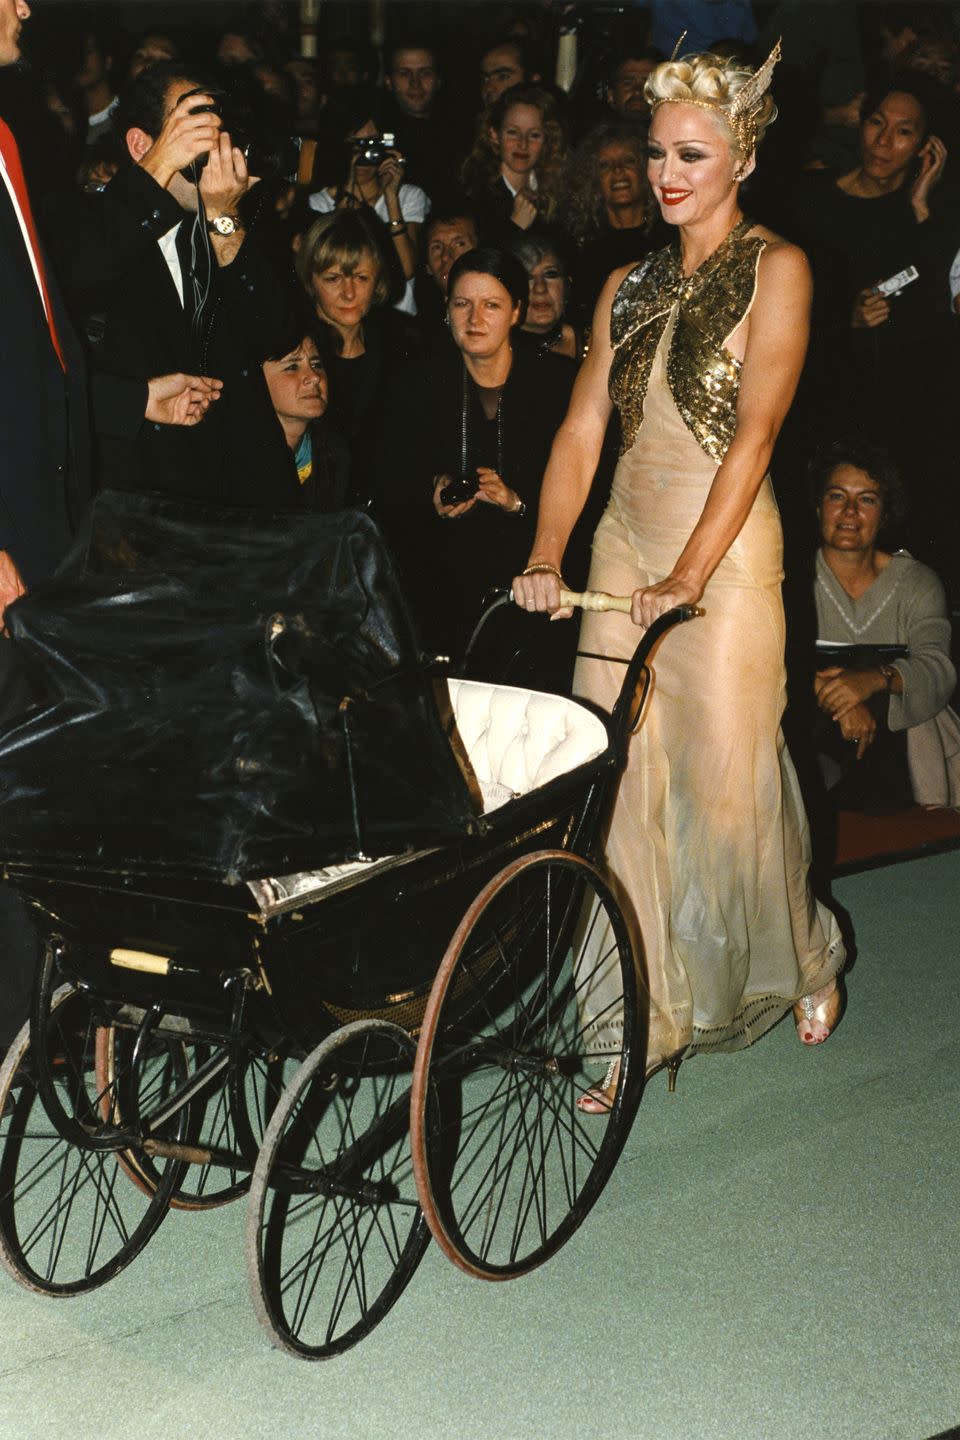 <p>Making a runway appearance for Jean Paul Gaultier, Madonna hit the catwalk in a sheer, gold embellished gown while pushing a baby carriage. </p>